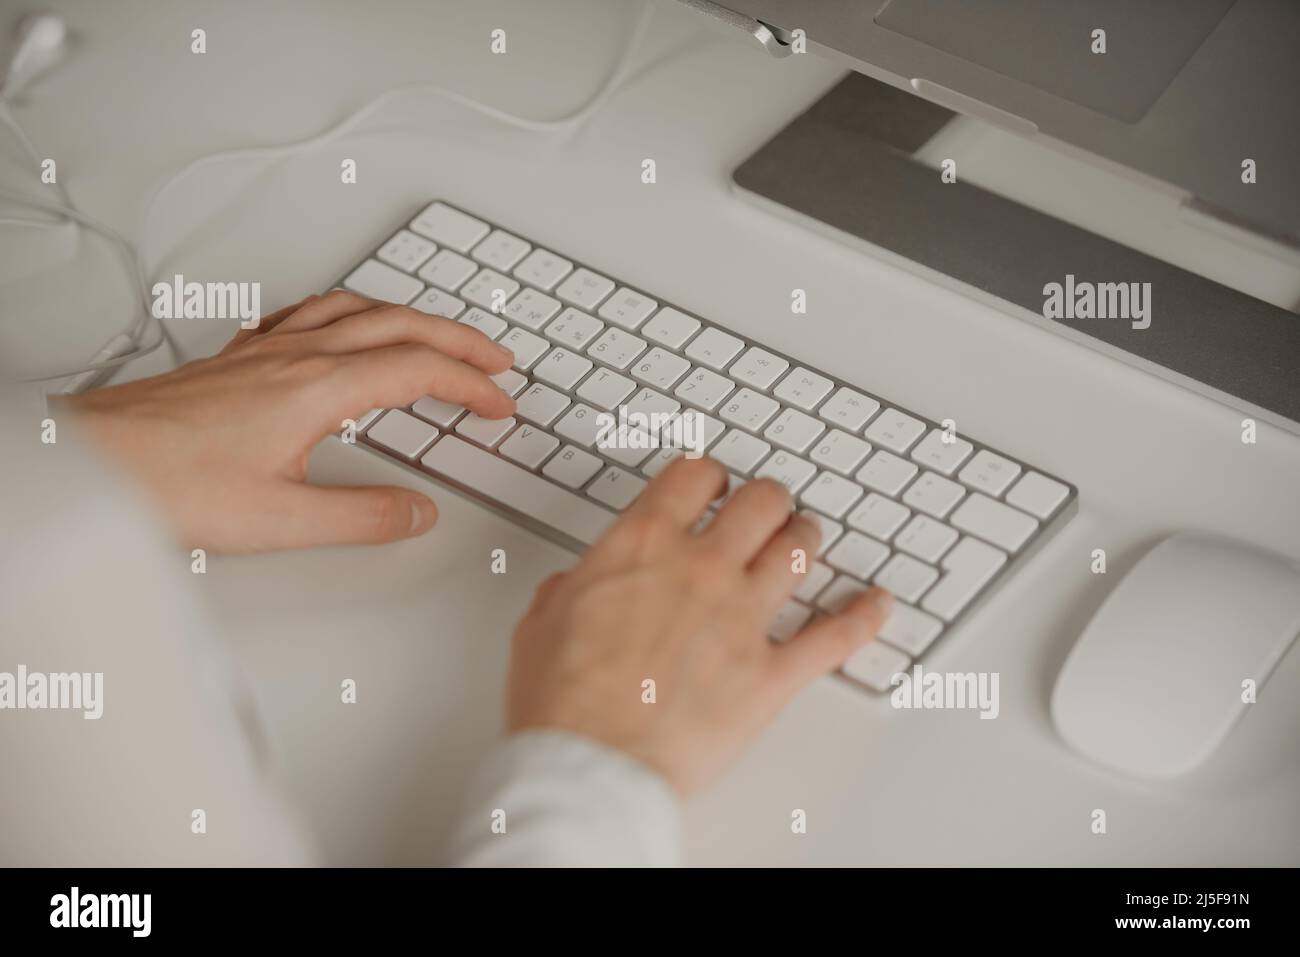 Close-up photo of woman’s hands typing on a wireless white aluminum keyboard. Stock Photo